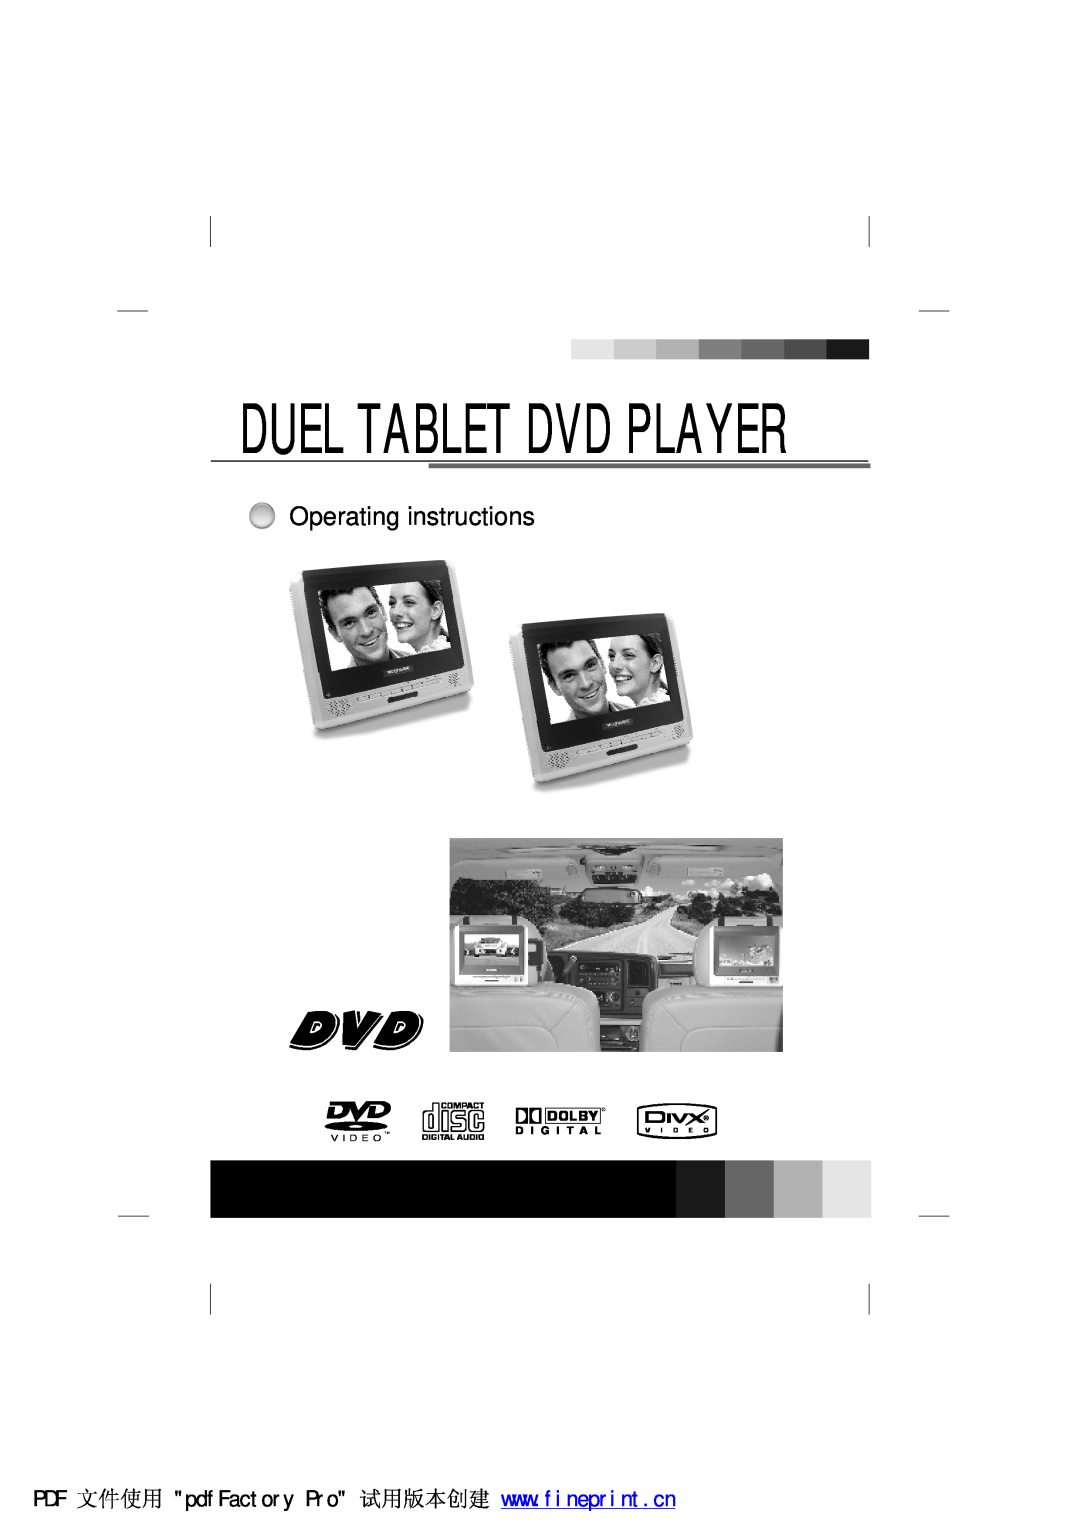 NextBase SDV97-AC manual Duel Tablet Dvd Player, Operating instructions 